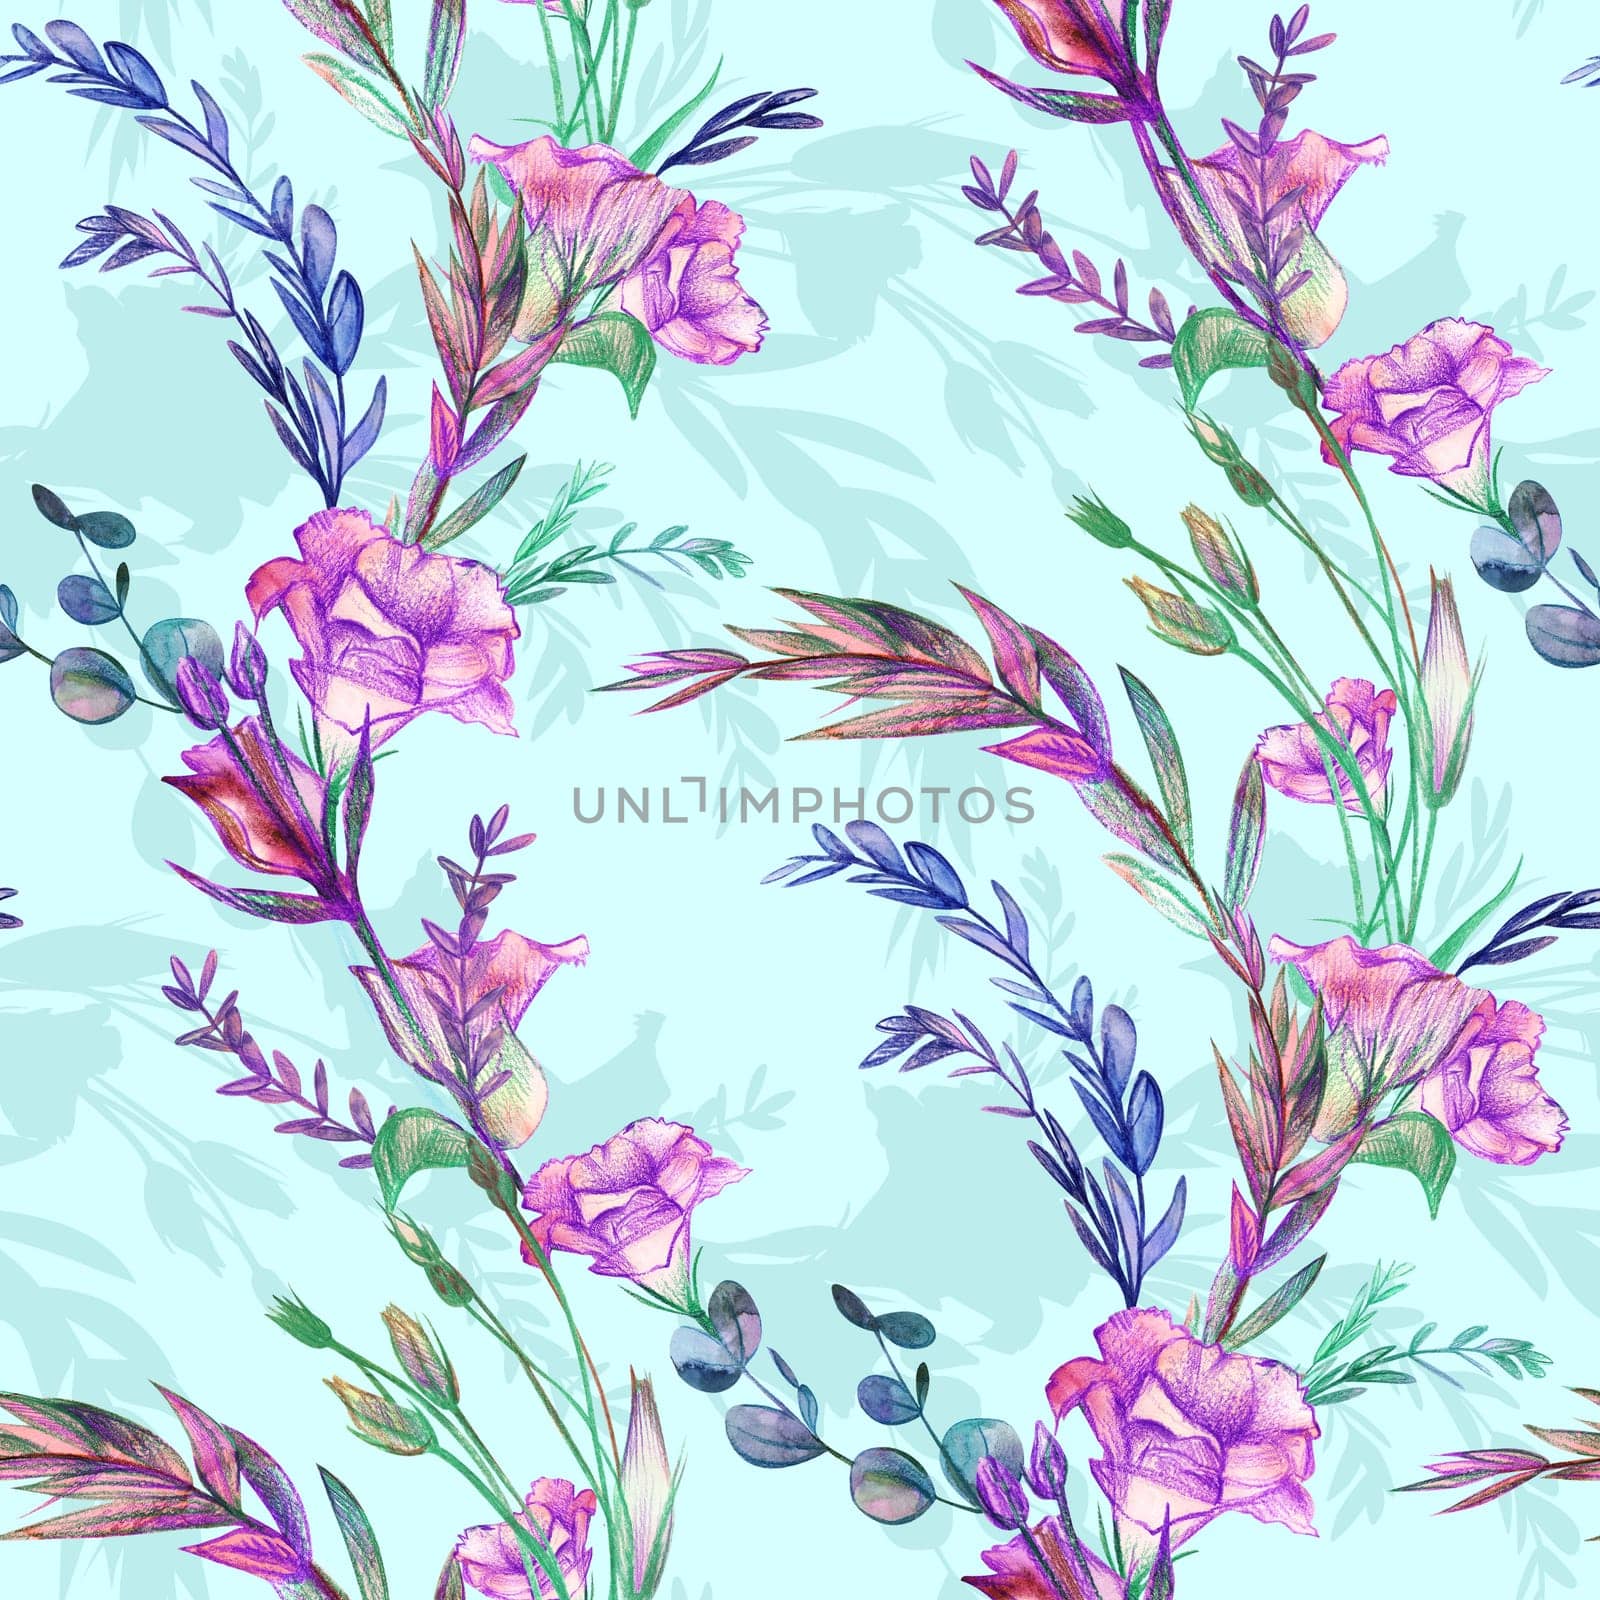 Eustoma twigs drawn with watercolors and pencils. Seamless botanical pattern with purple flowers by MarinaVoyush